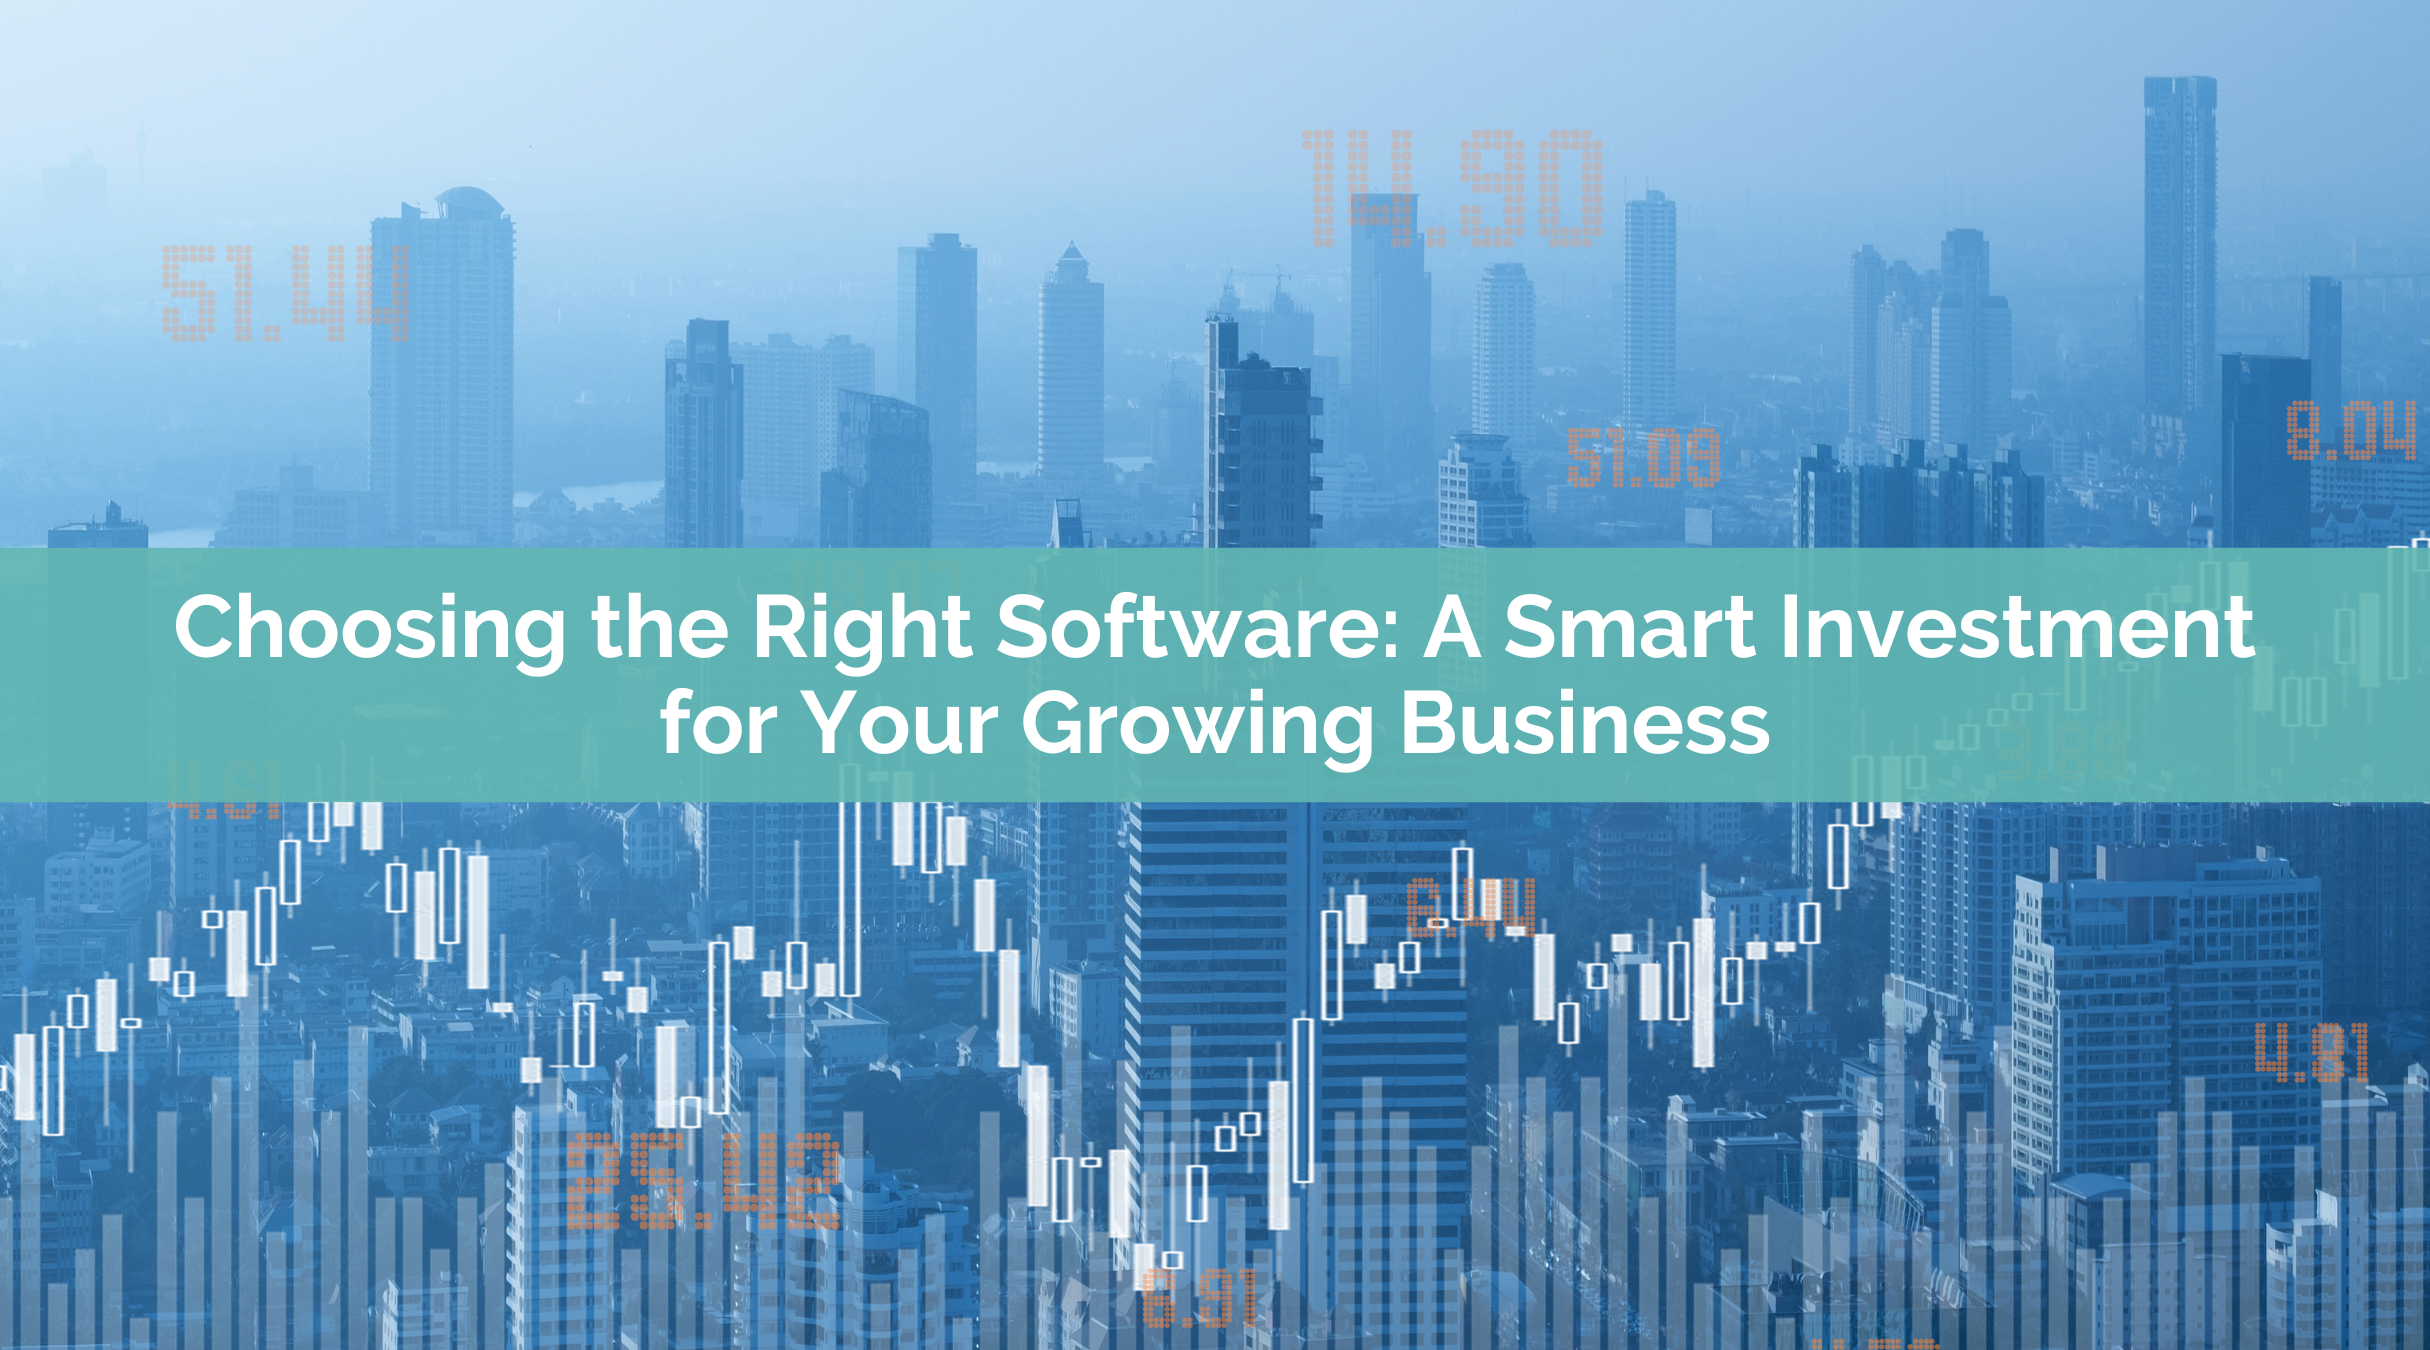 Choosing the Right Software: A Smart Investment for Your Growing Business